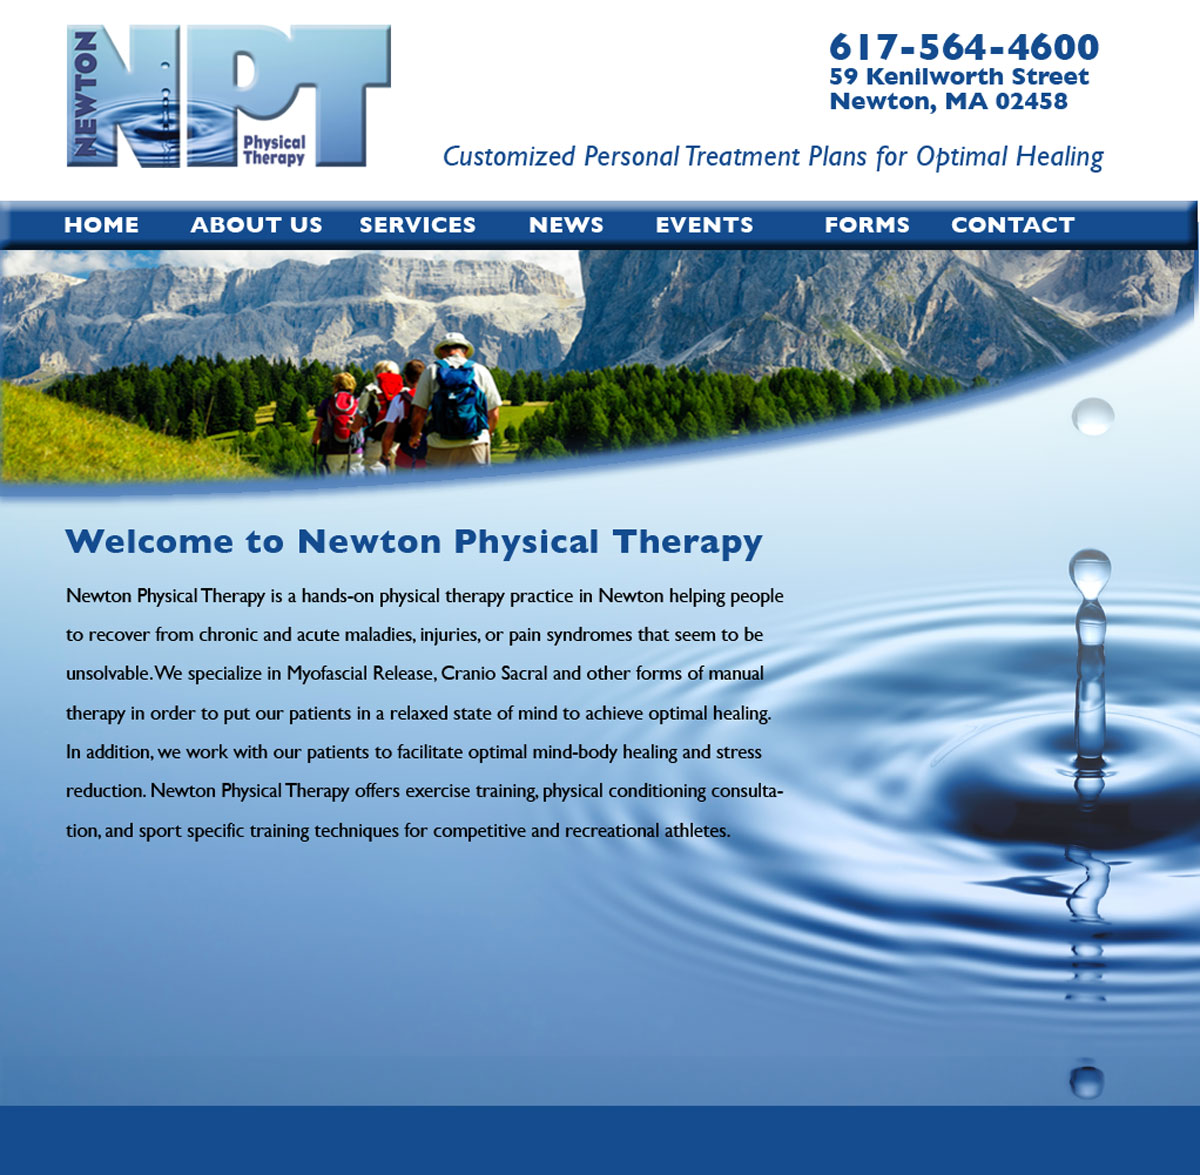 Newton Physical Therapy website